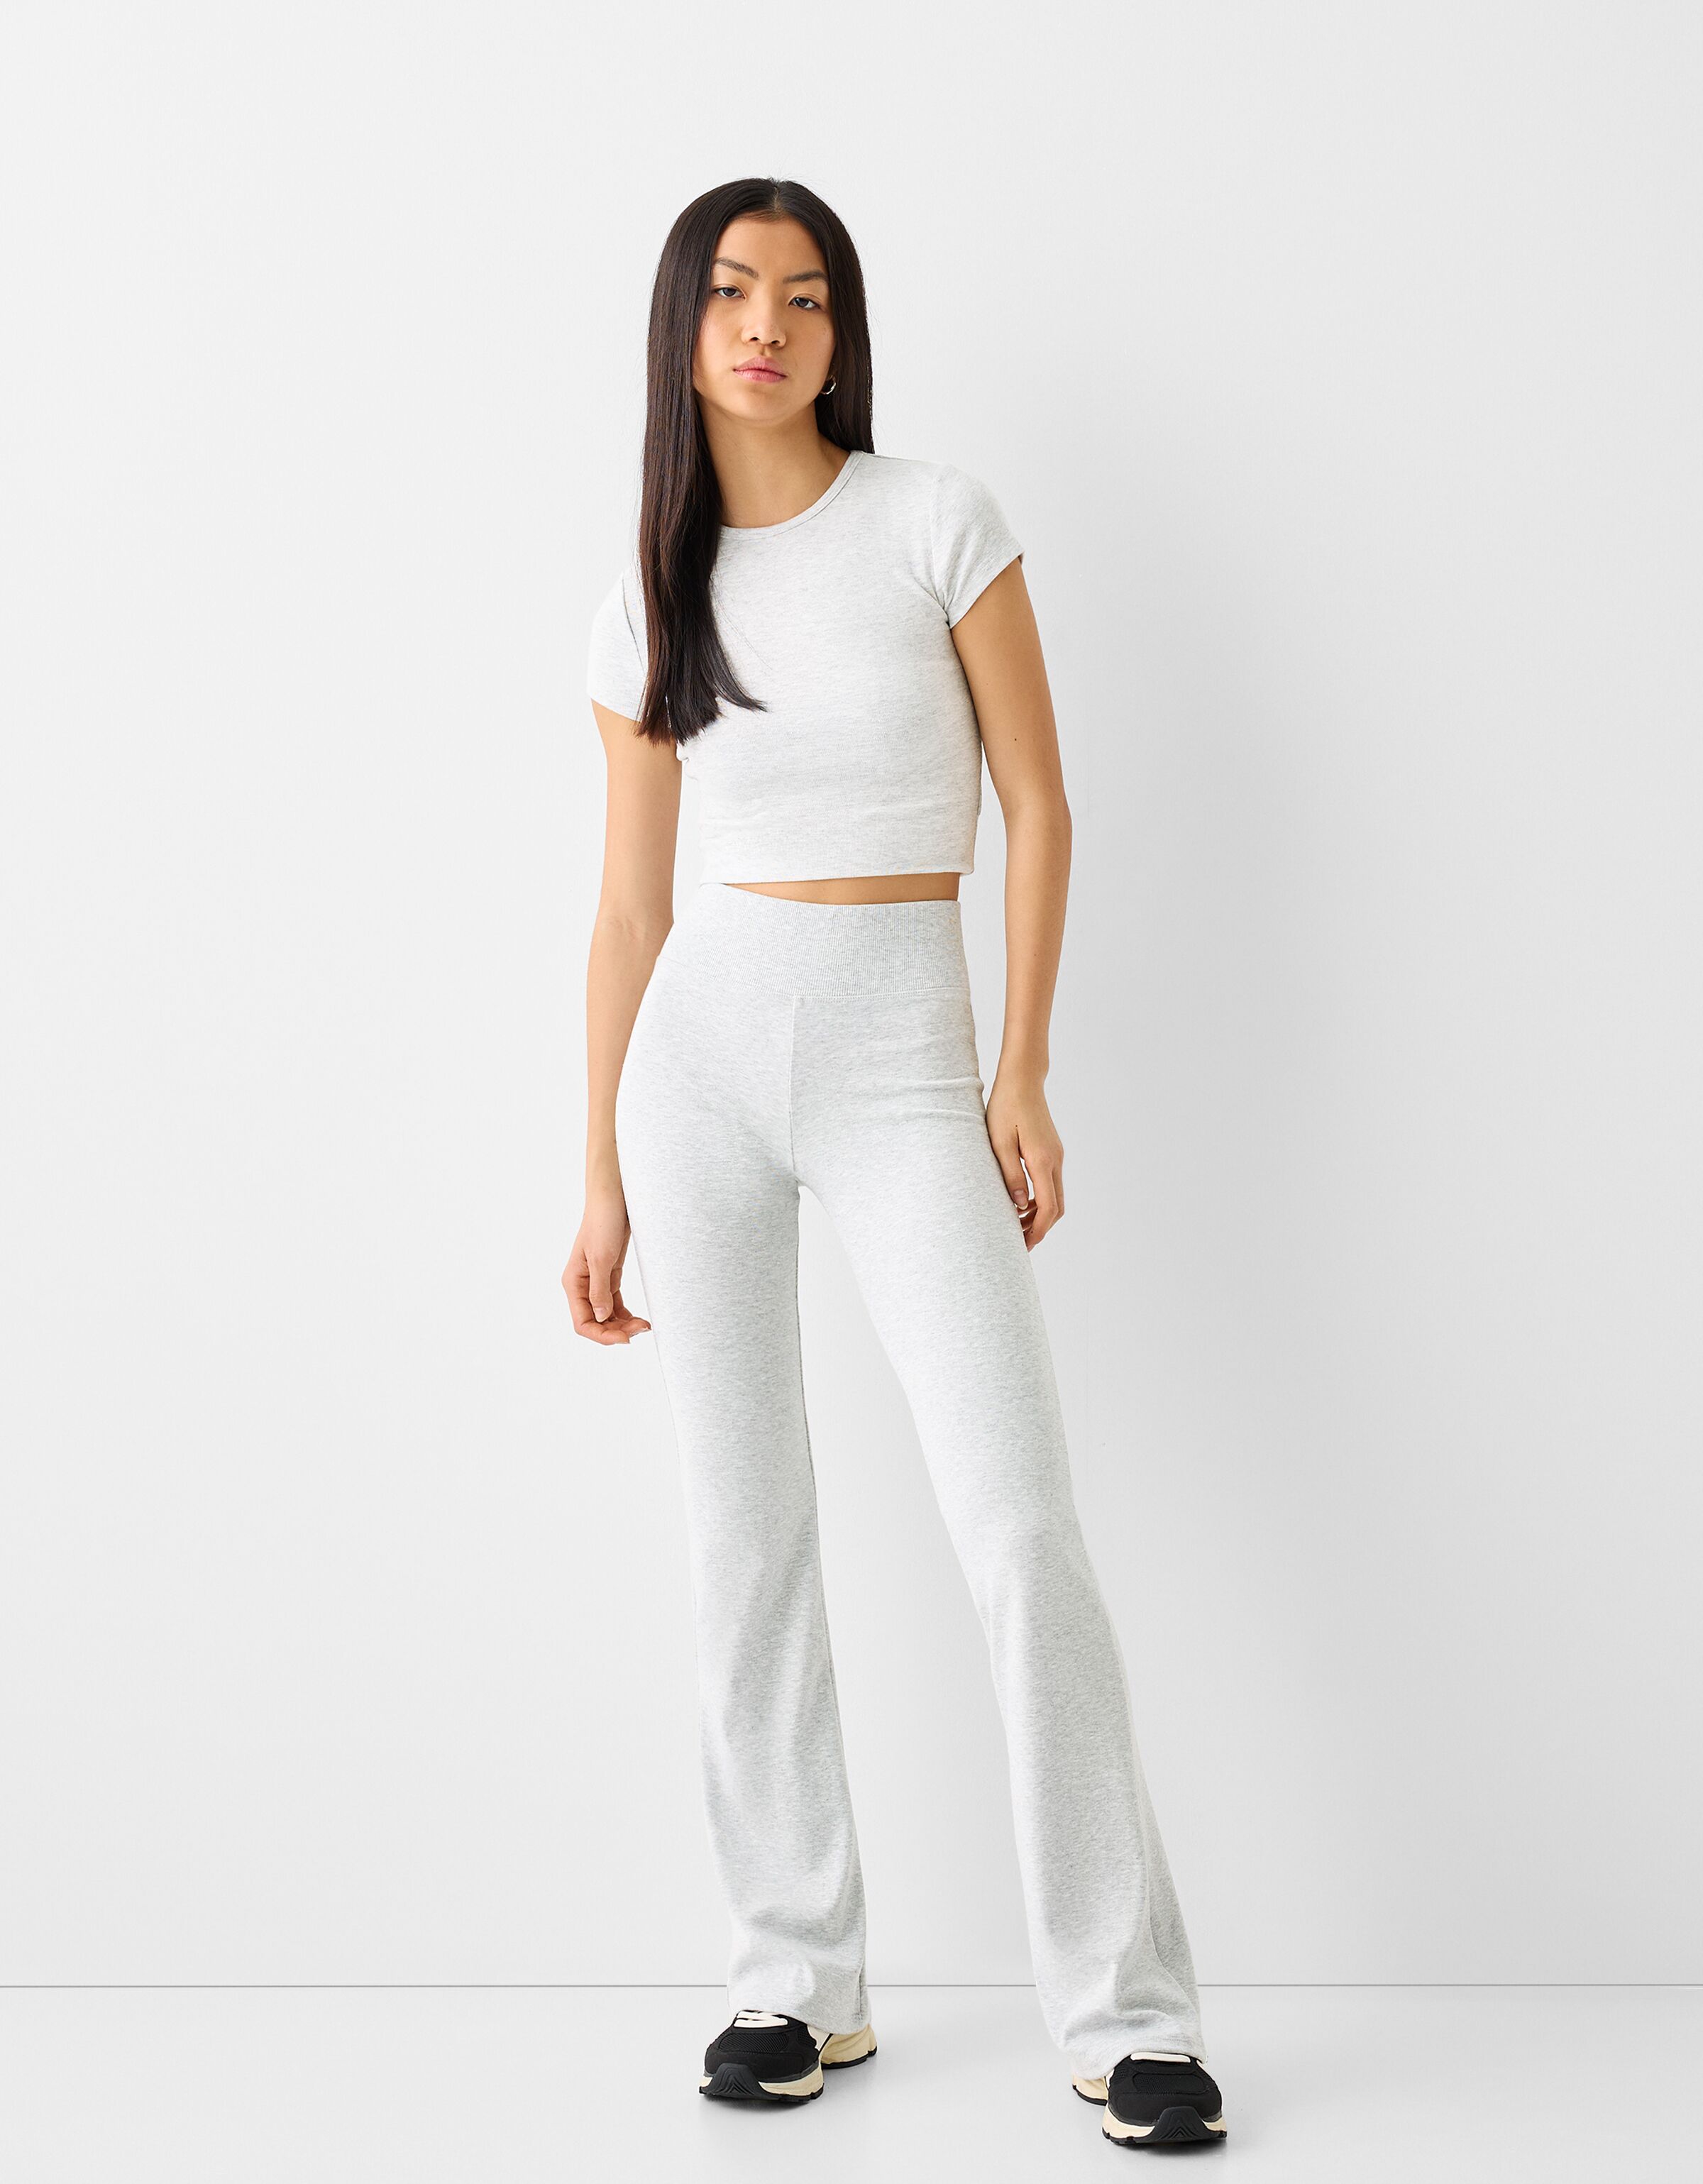 Smile Women's ribbed trousers with flared finish: for sale at 15.99€ on  Mecshopping.it